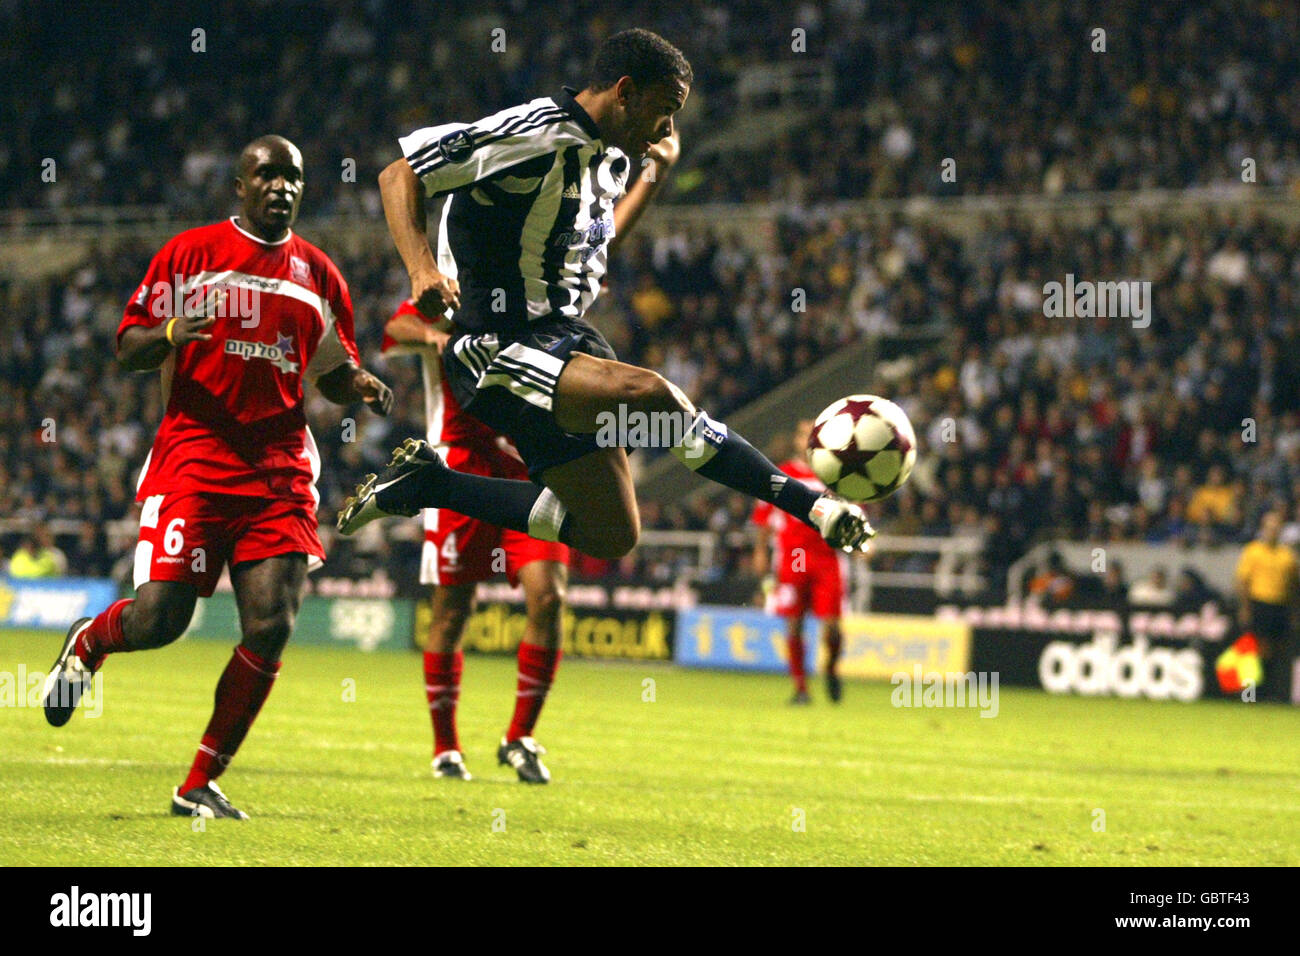 Soccer - UEFA Cup - First Round - First Leg - Newcastle United v Hapoel Bnei Sakhnin. Newcastle United's Kieron Dyer (c) in action Stock Photo